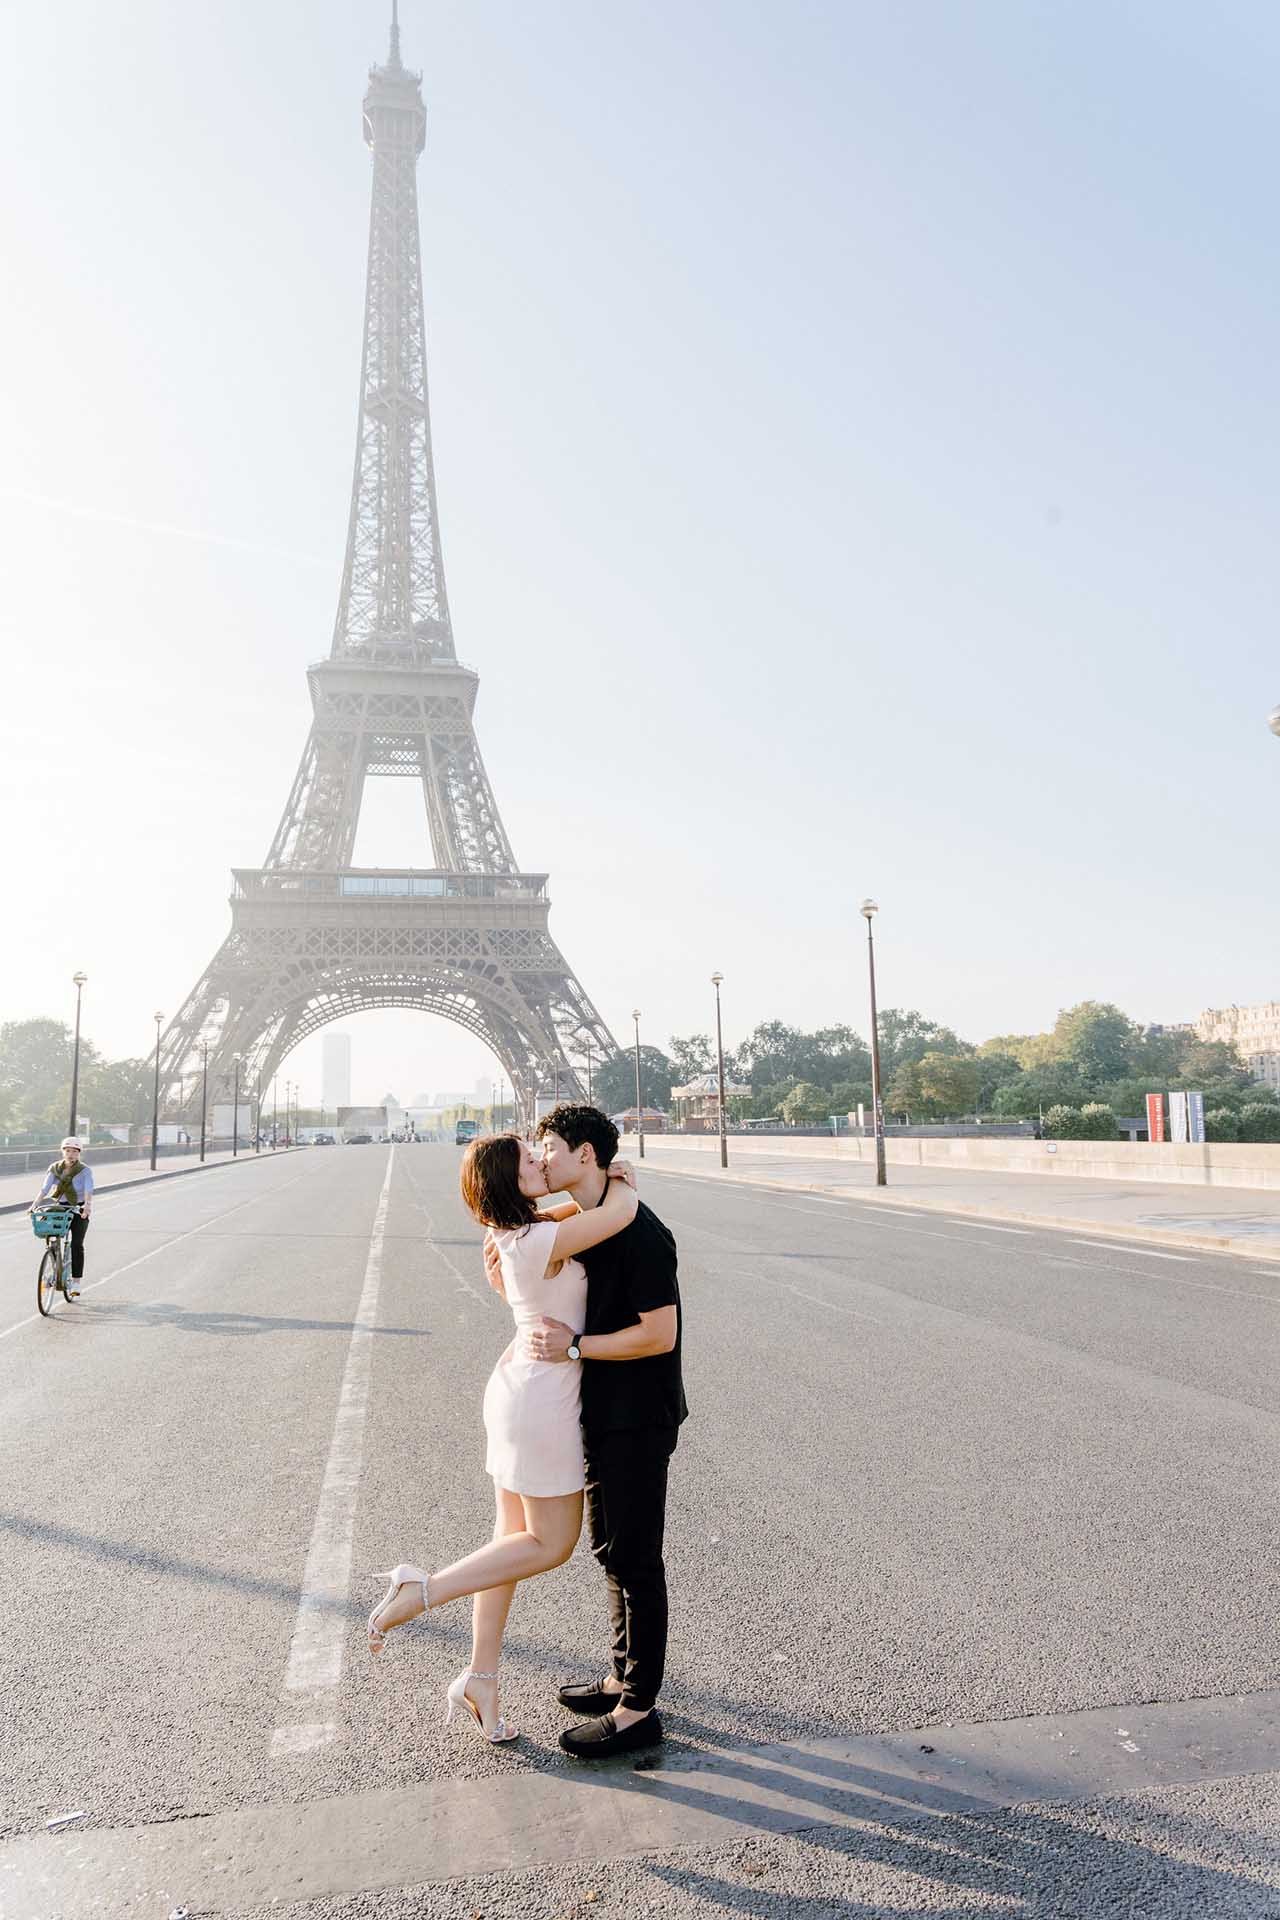 Romantic Kiss in front of Eiffel Tower in Paris Engagement Photoshoot 